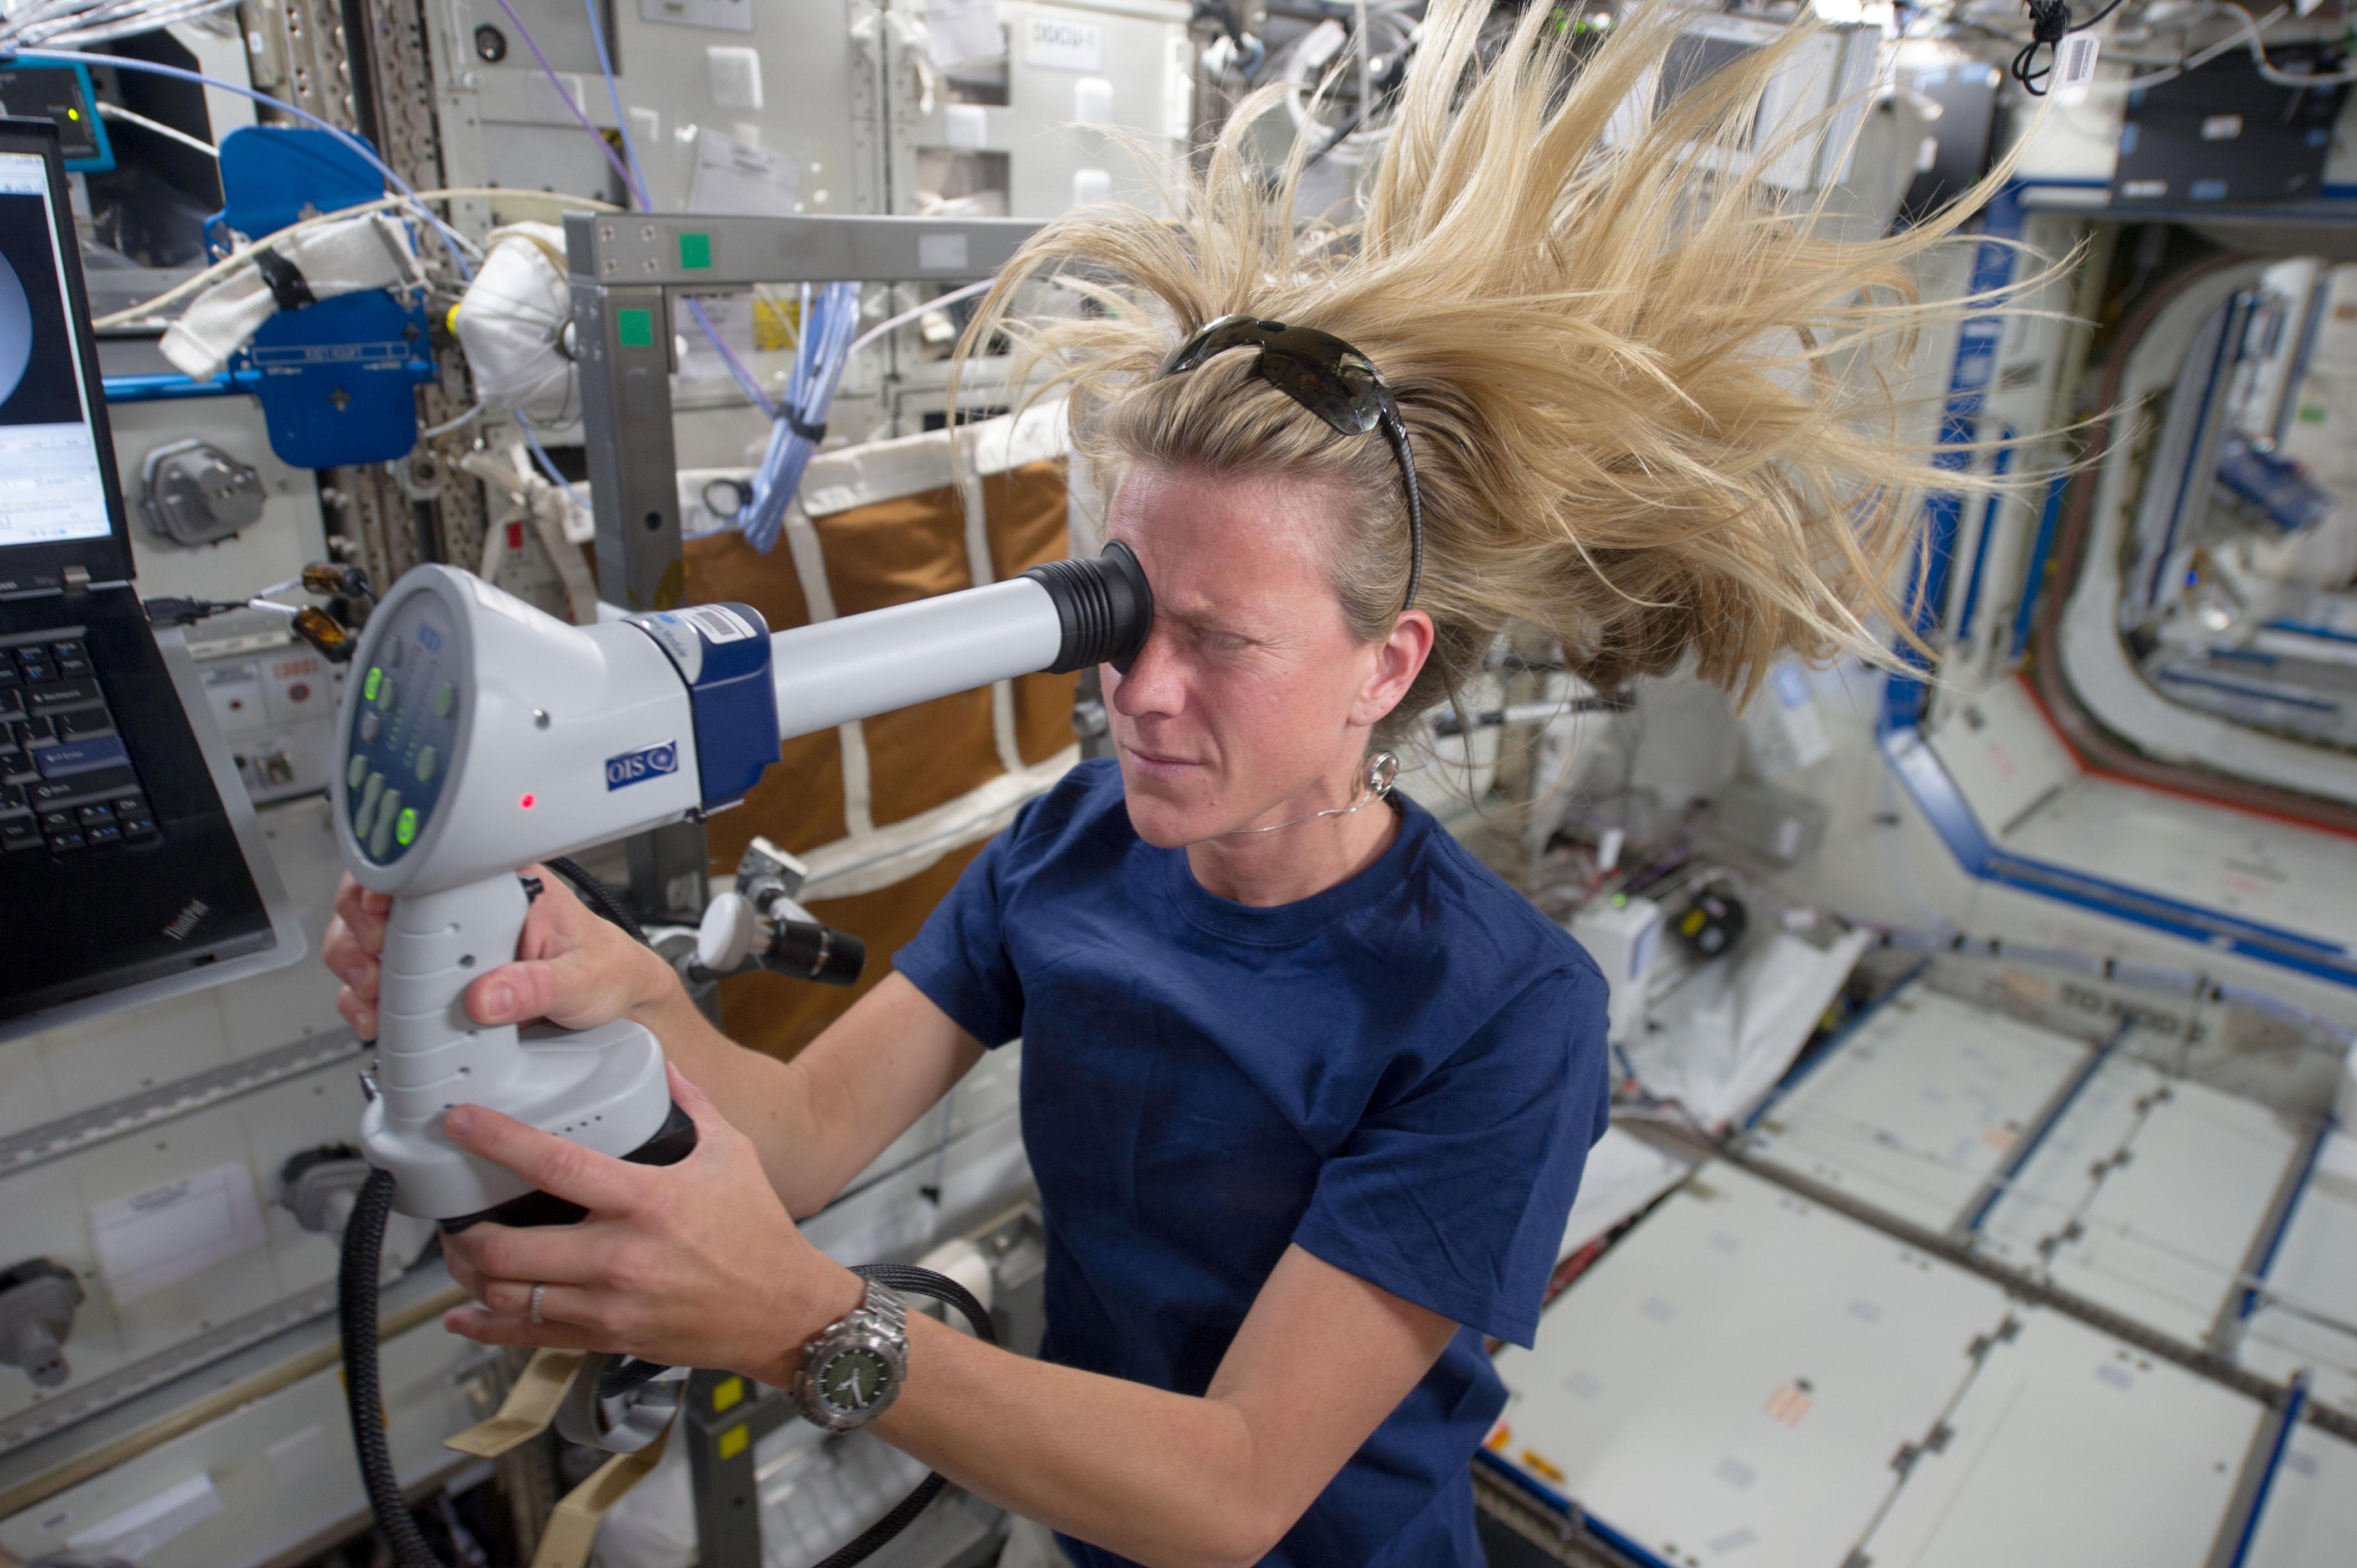 NASA astronaut Karen Nyberg, Expedition 36 flight engineer, conducts an ocular health exam on herself in the Destiny laboratory of the Earth-orbiting International Space Station.